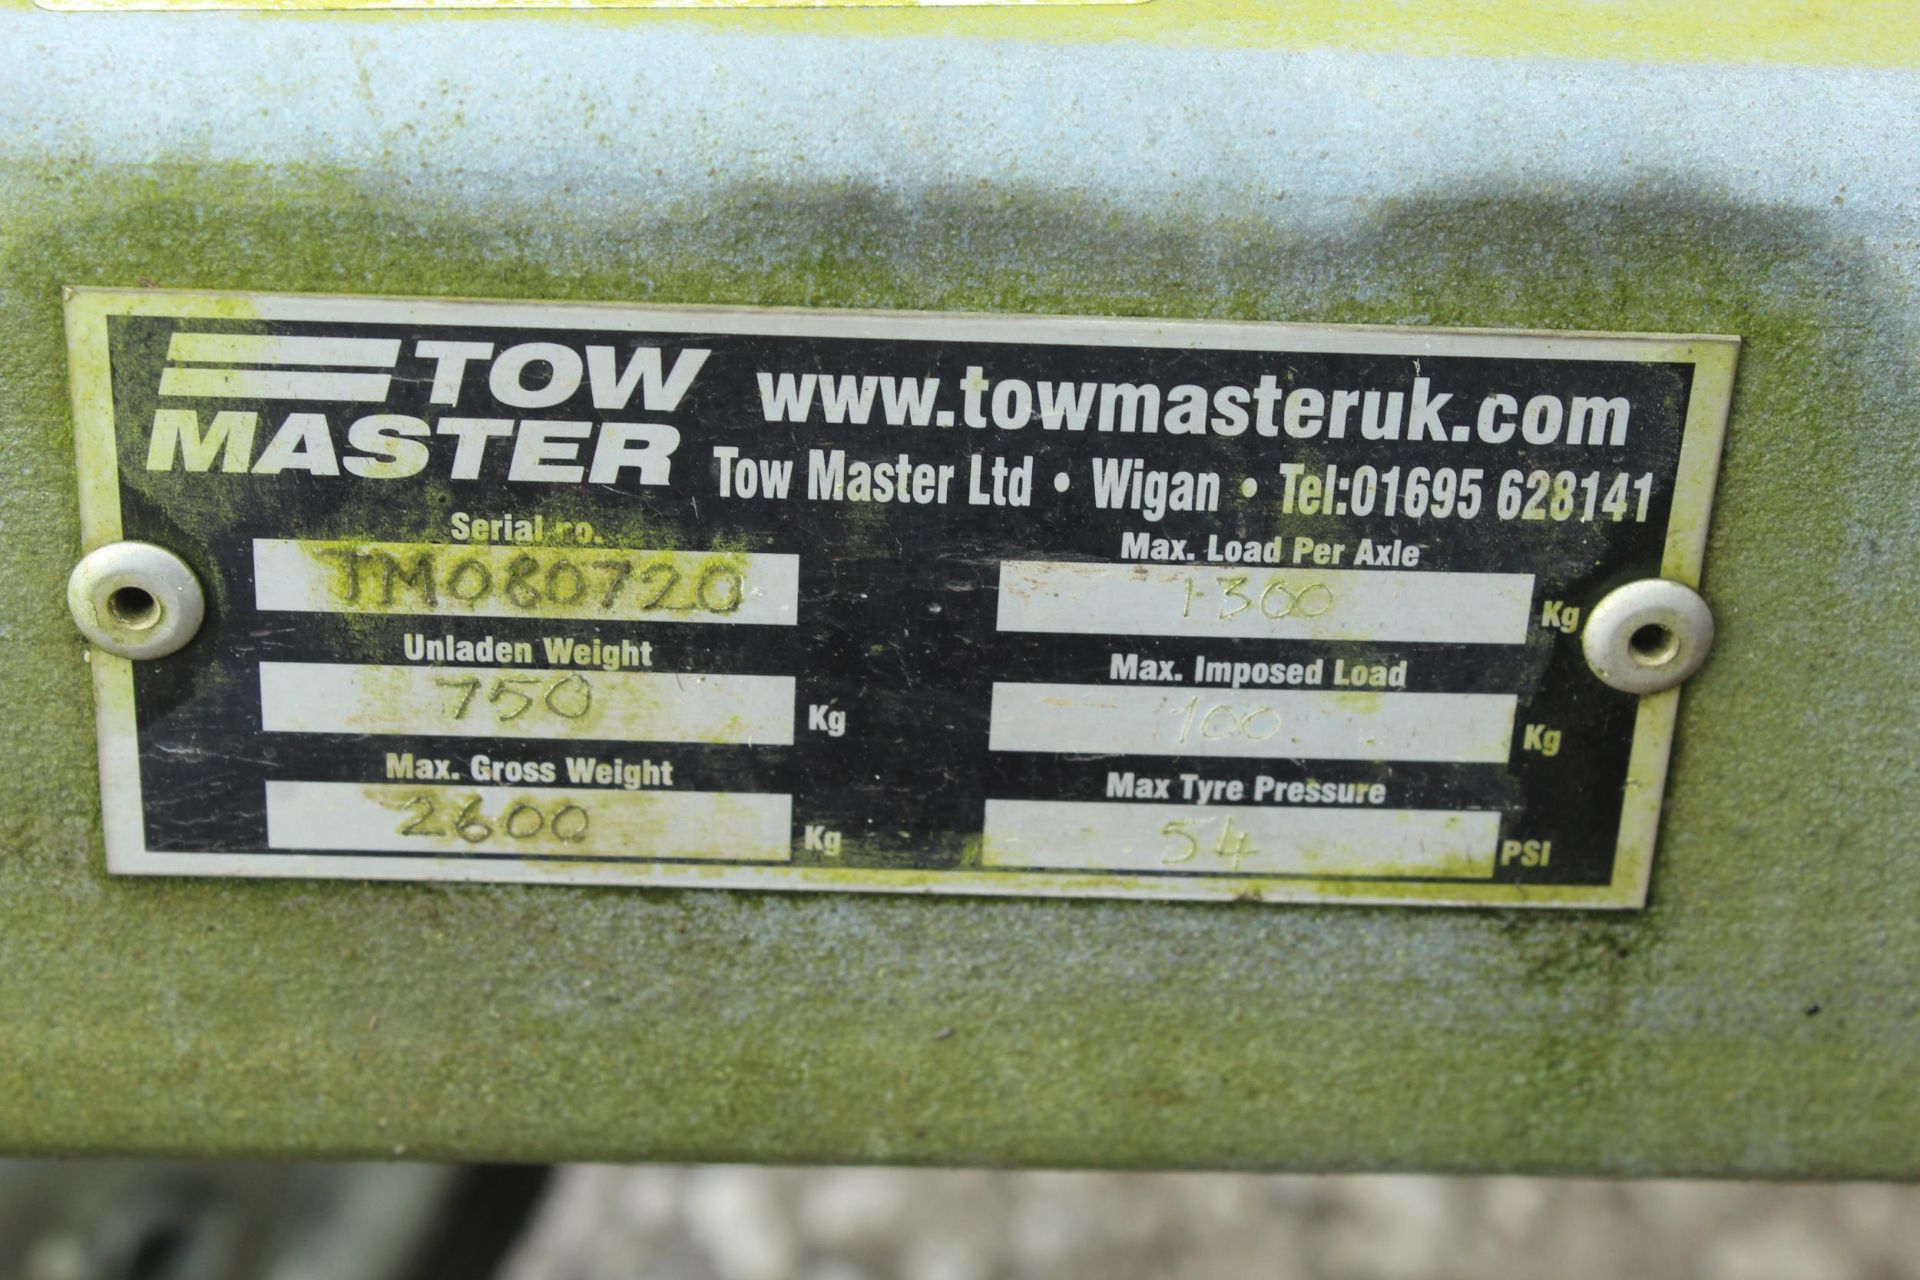 TOW MASTER TWIN AXLE BOX TRAILER 2600KG GROSS SERIAL NUMBER TM080720 NO VAT - Image 4 of 4